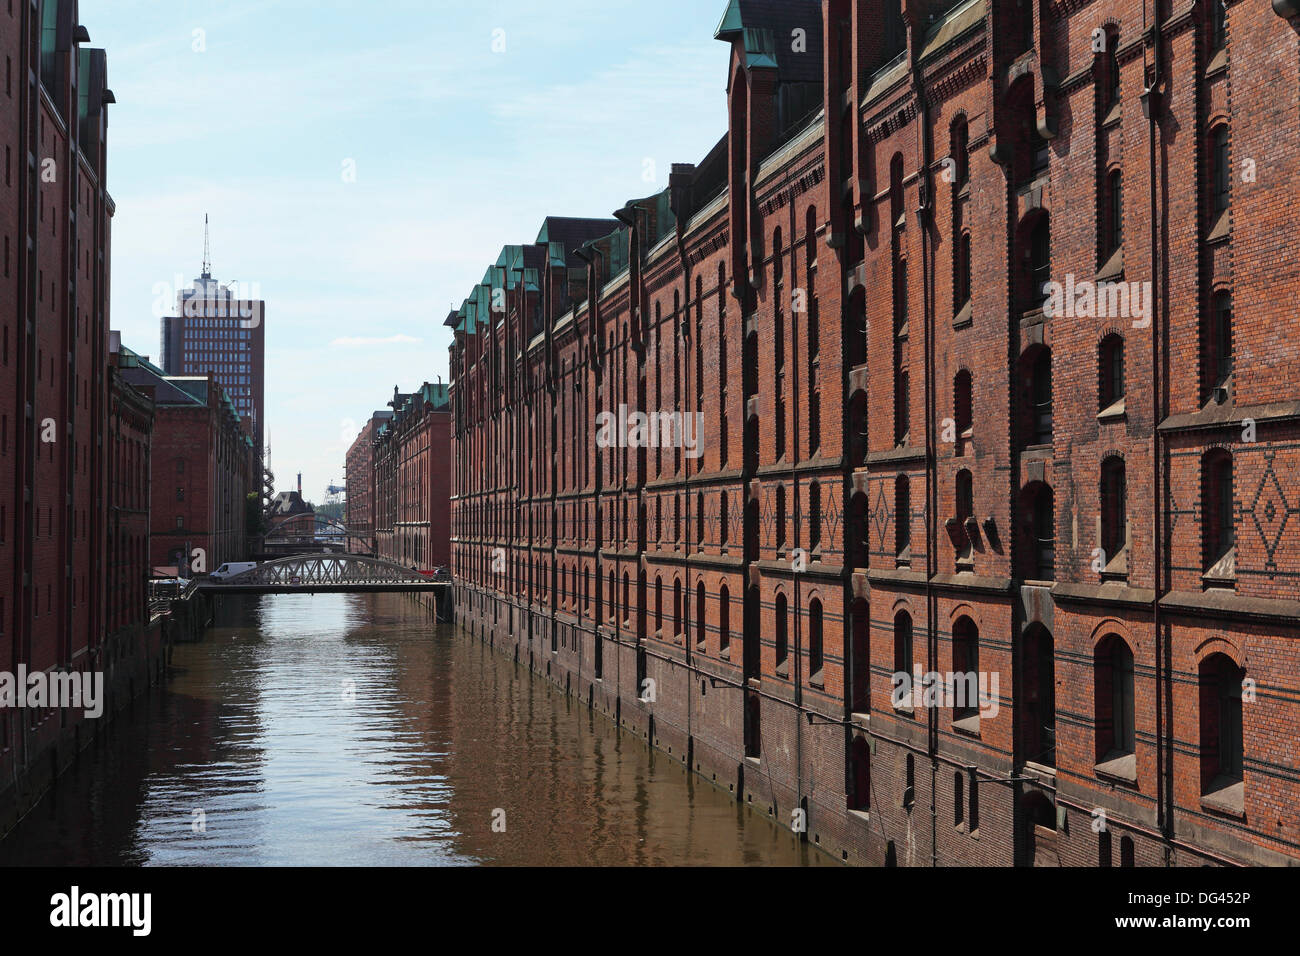 Red brick warehouses overlook a canal in the Speicherstadt district, once a duty free port, in Hamburg, Germany, Europe Stock Photo